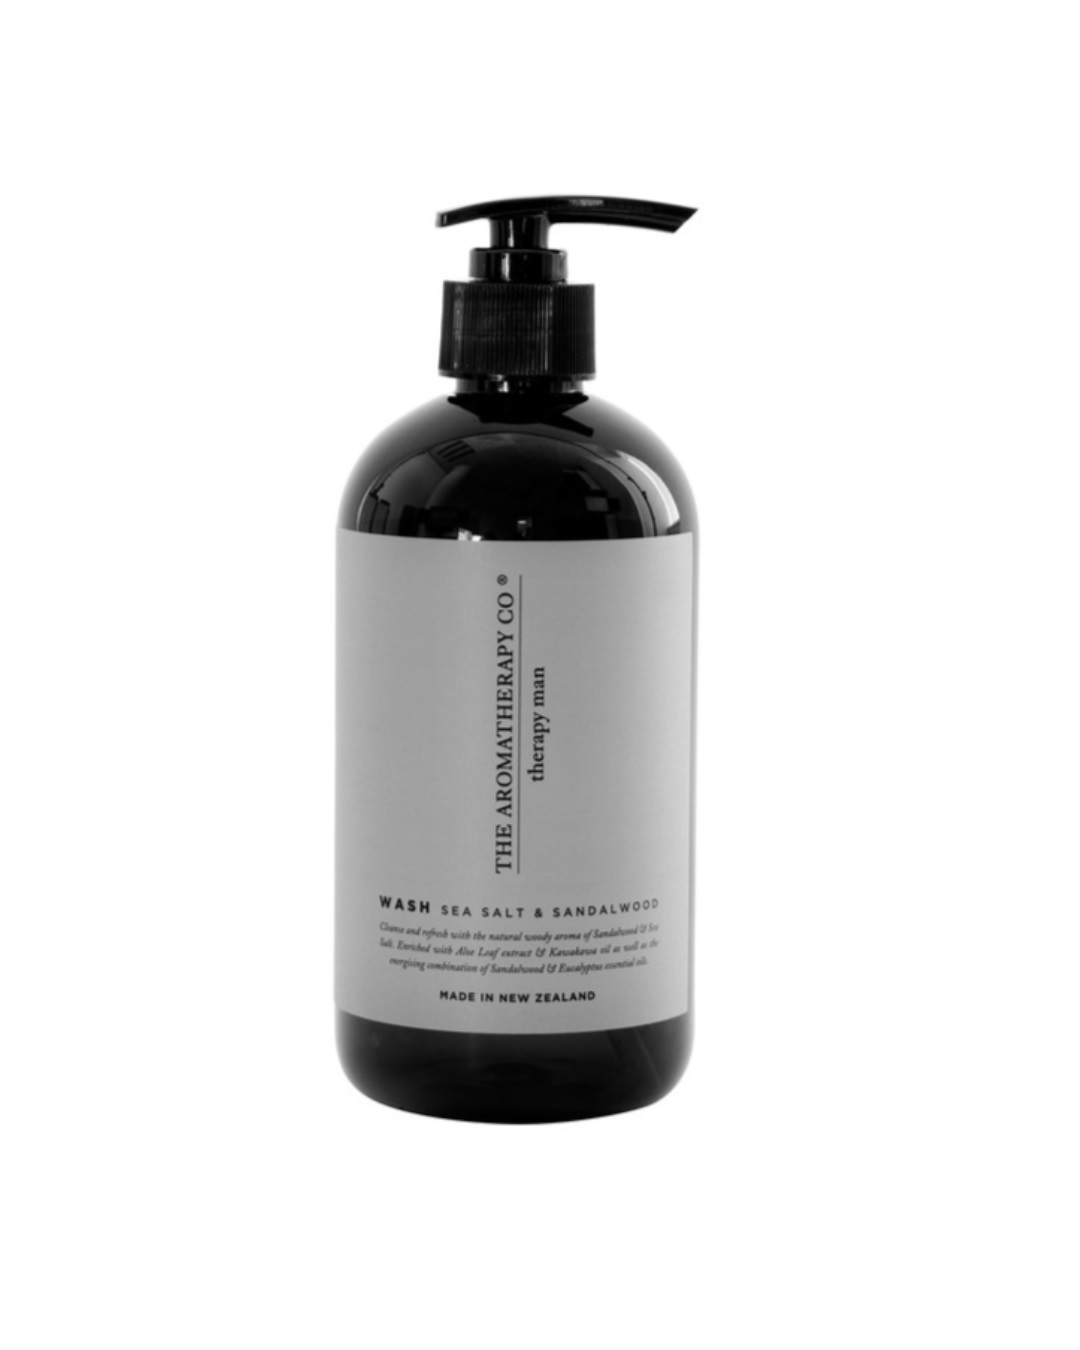 Therapy man hand and body wash in sandalwood and sea salt